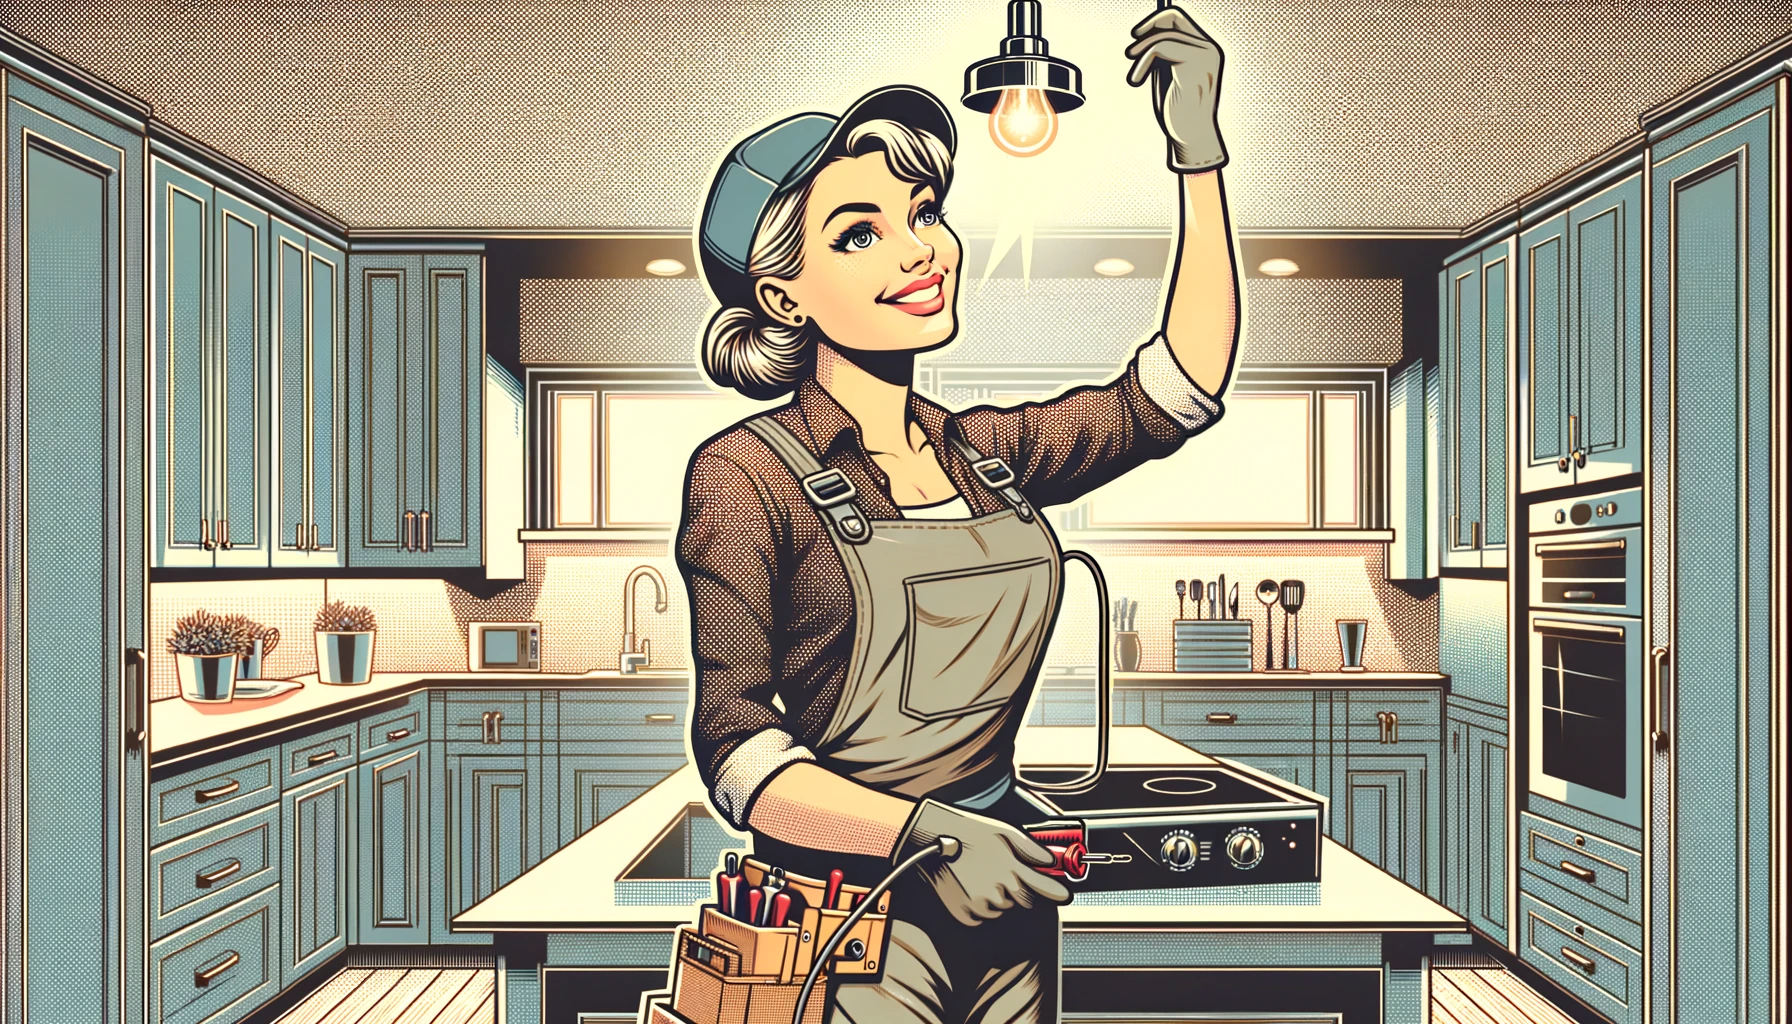 electrician illustration installing lighting fixtures in the kitchen